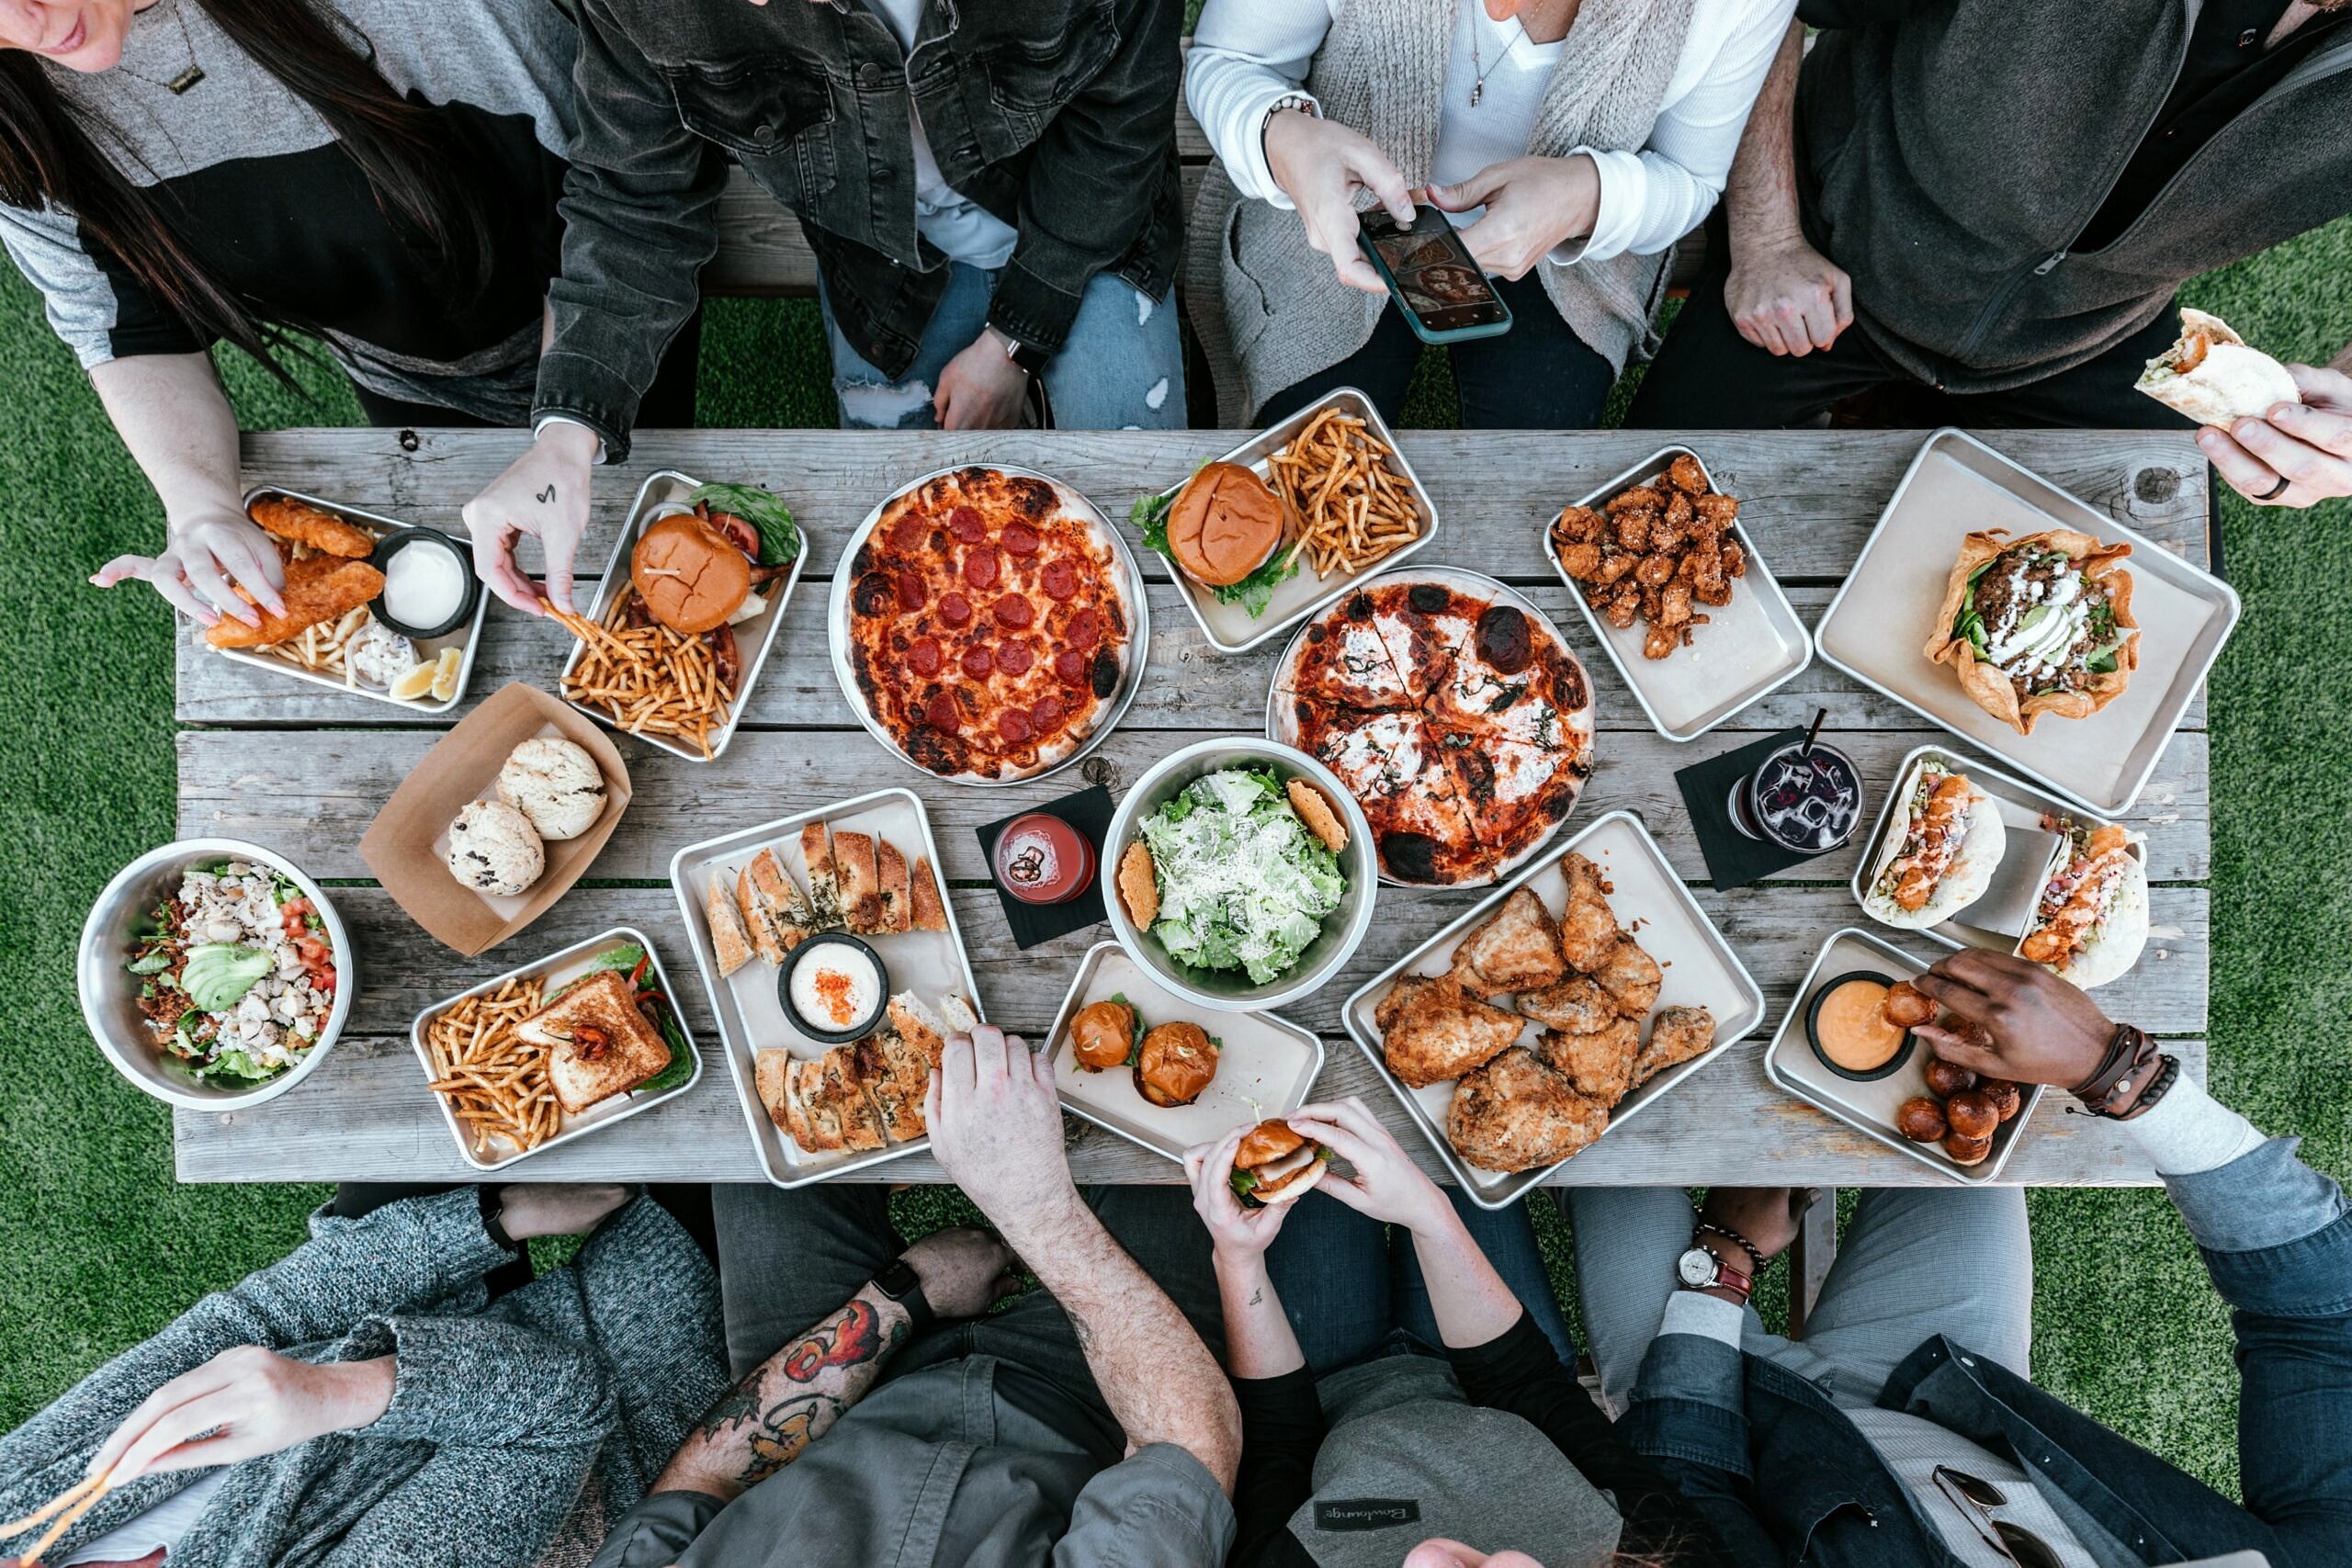 Birds eye view of a group of people eating around a table with foods to gain weight.